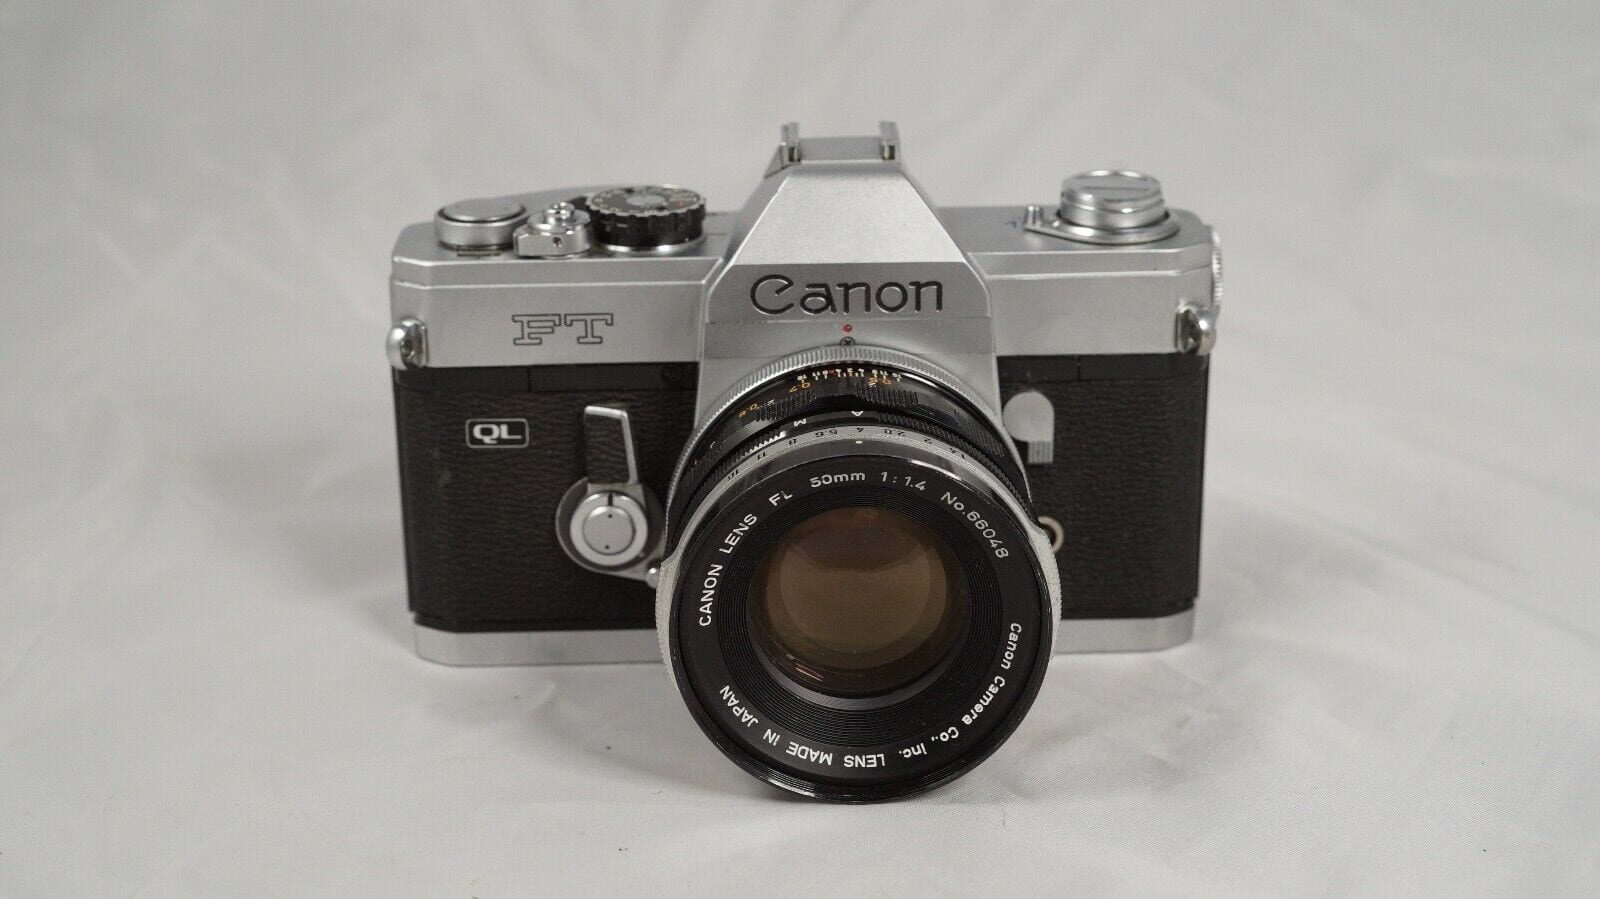 Canon FT QL Camera with FL 55mm 1:1.2 Lens | Adriano 